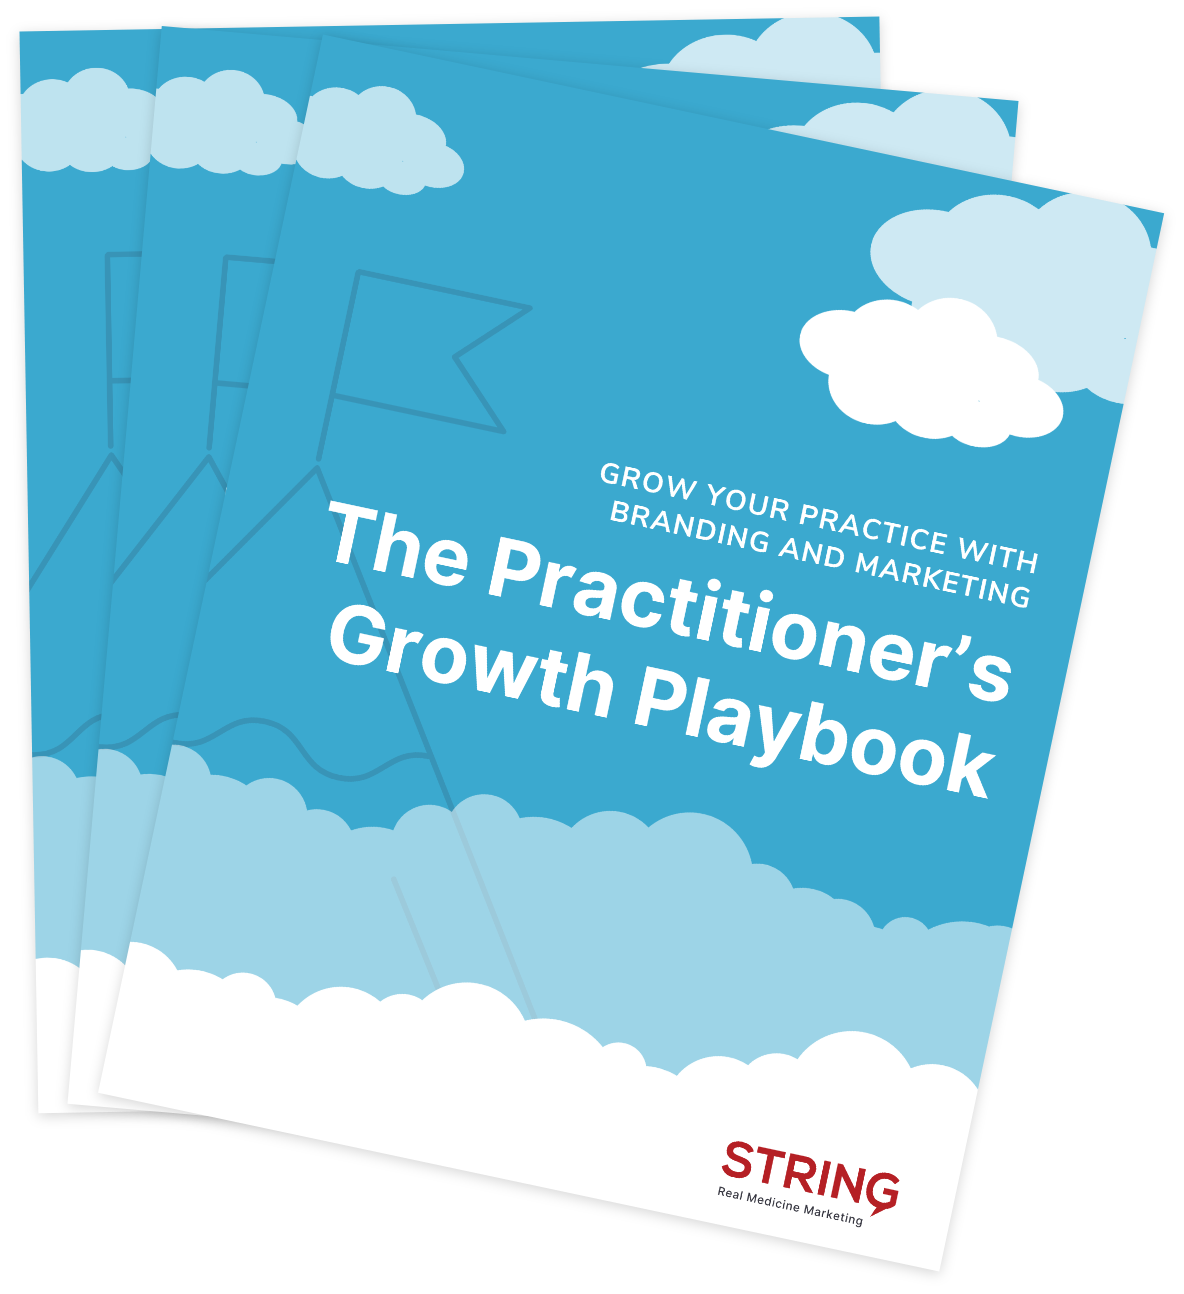 The Practitioner's Growth Playbook from String Marketing - for RDs, integrative medicine practitioners, health and wellness practitioners and more